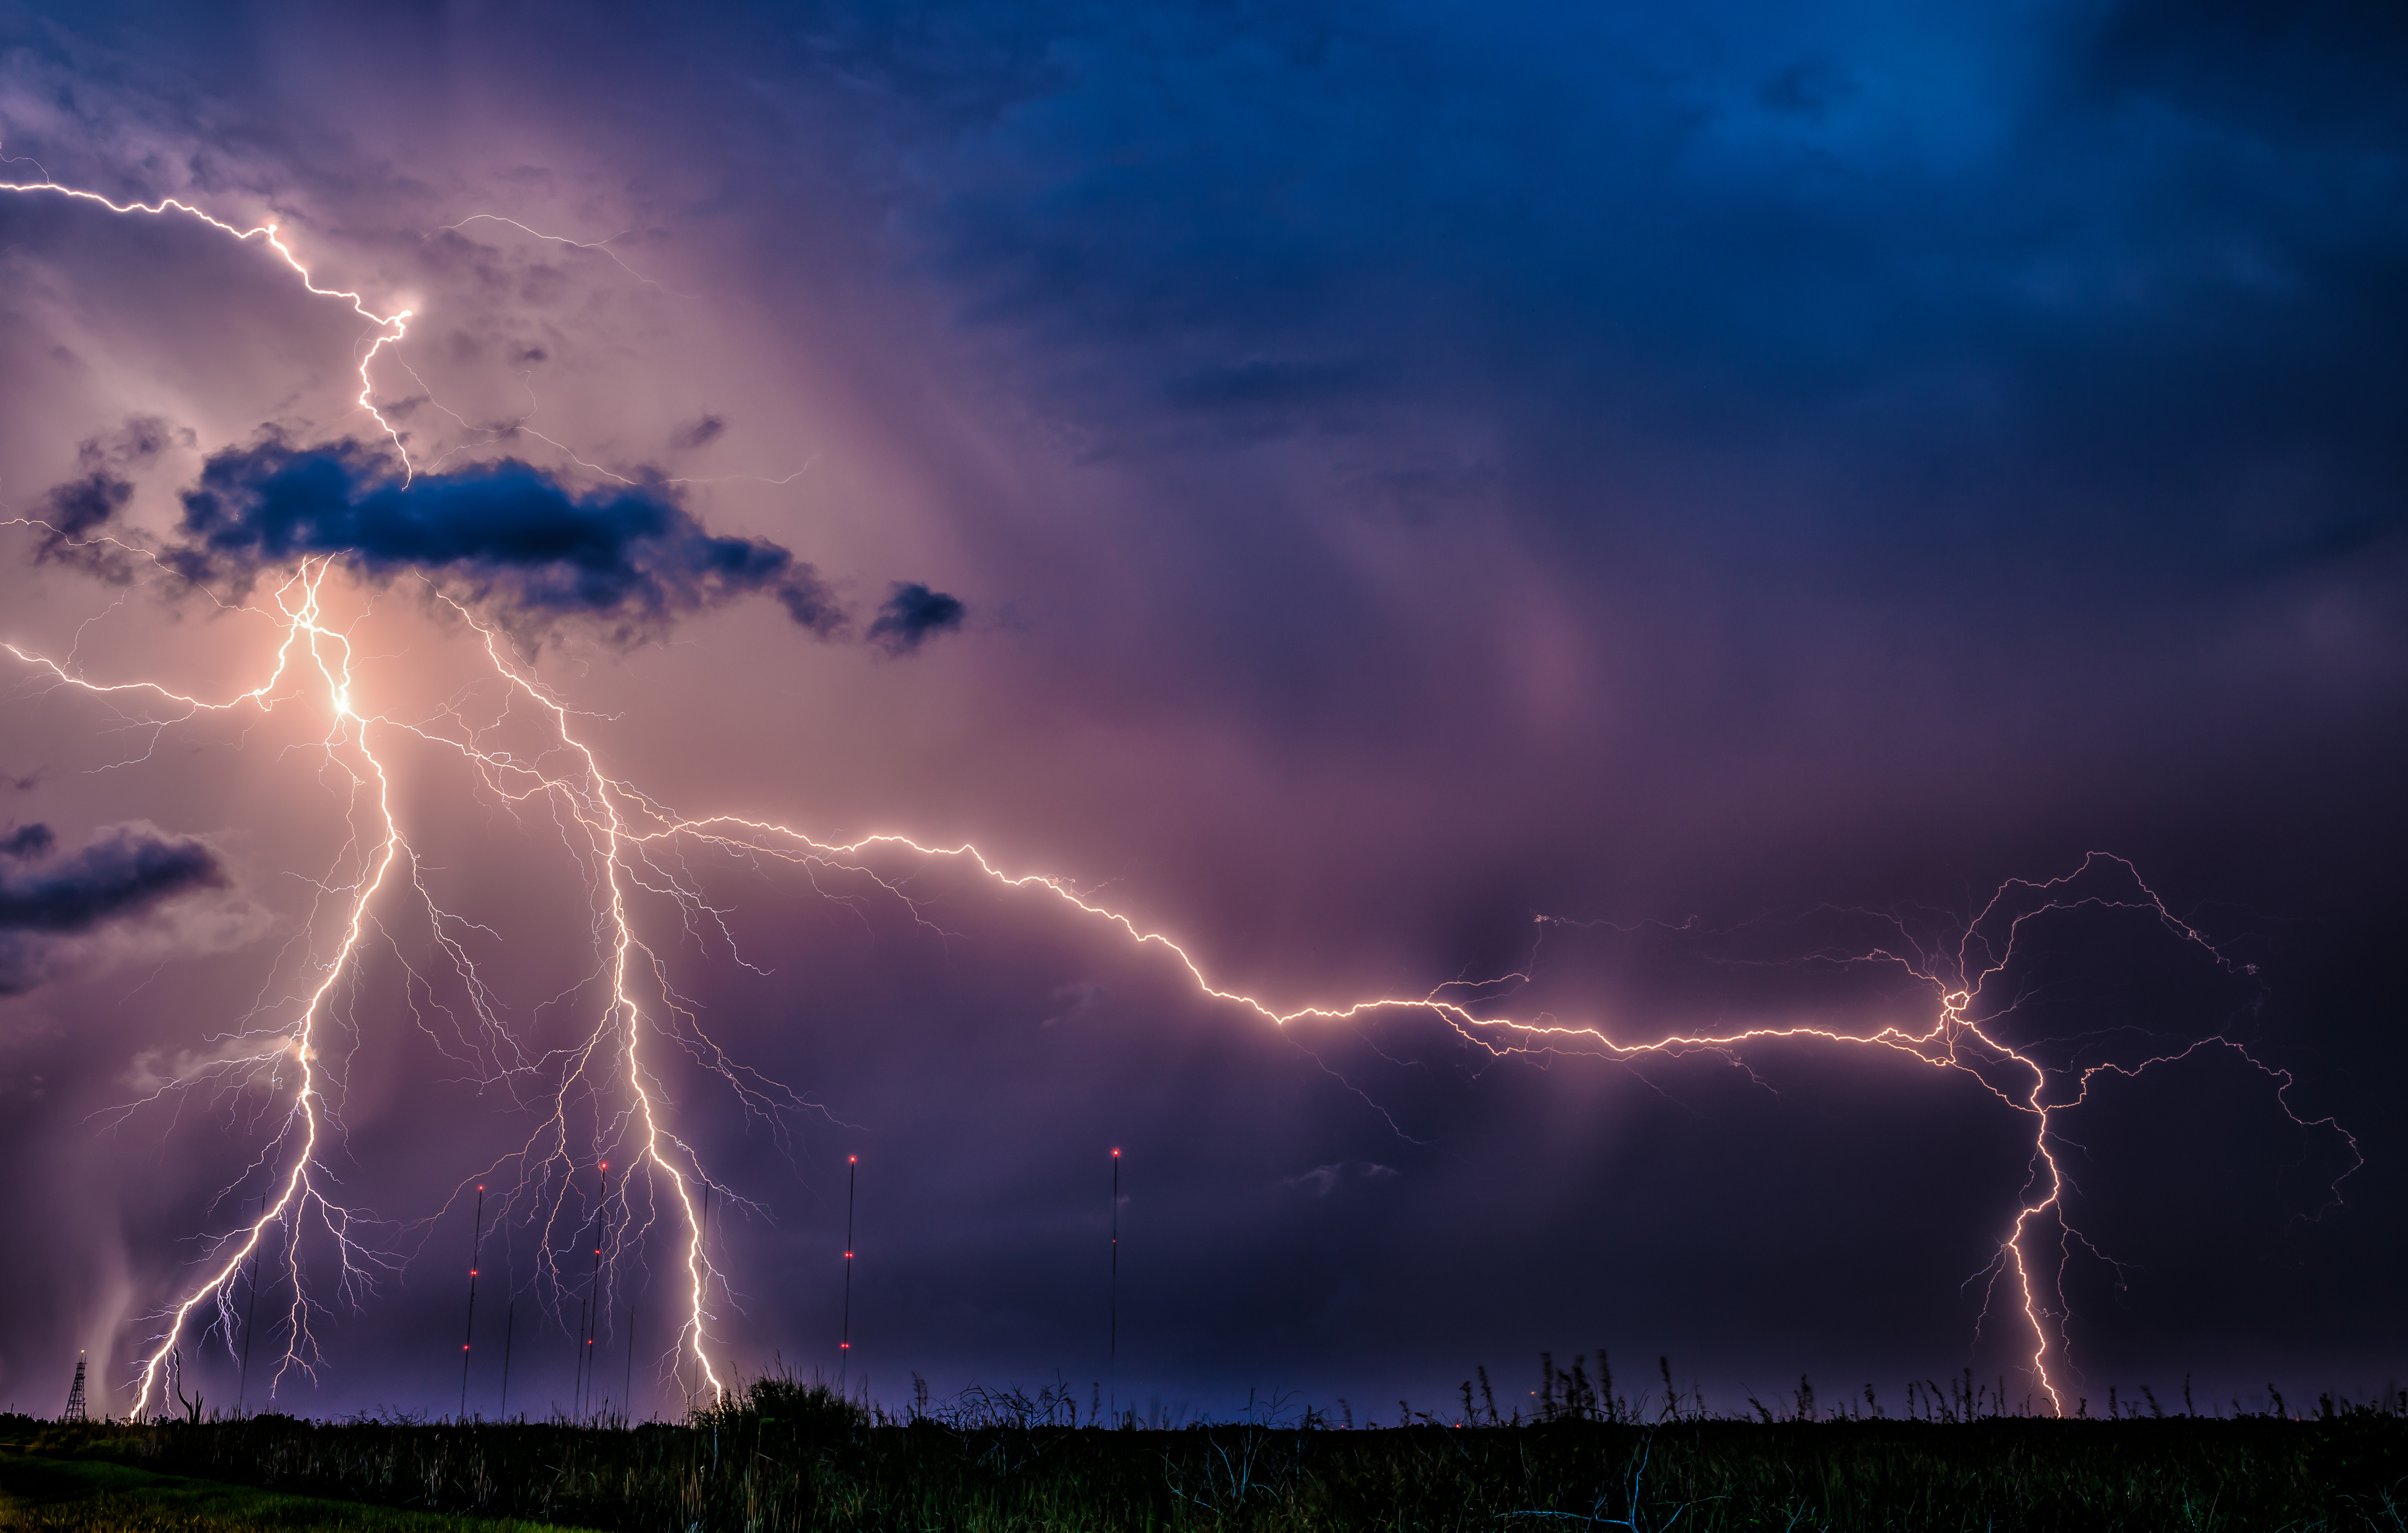 Lightning strikes with visible bolts against a stormy sky, over a field with distant towers